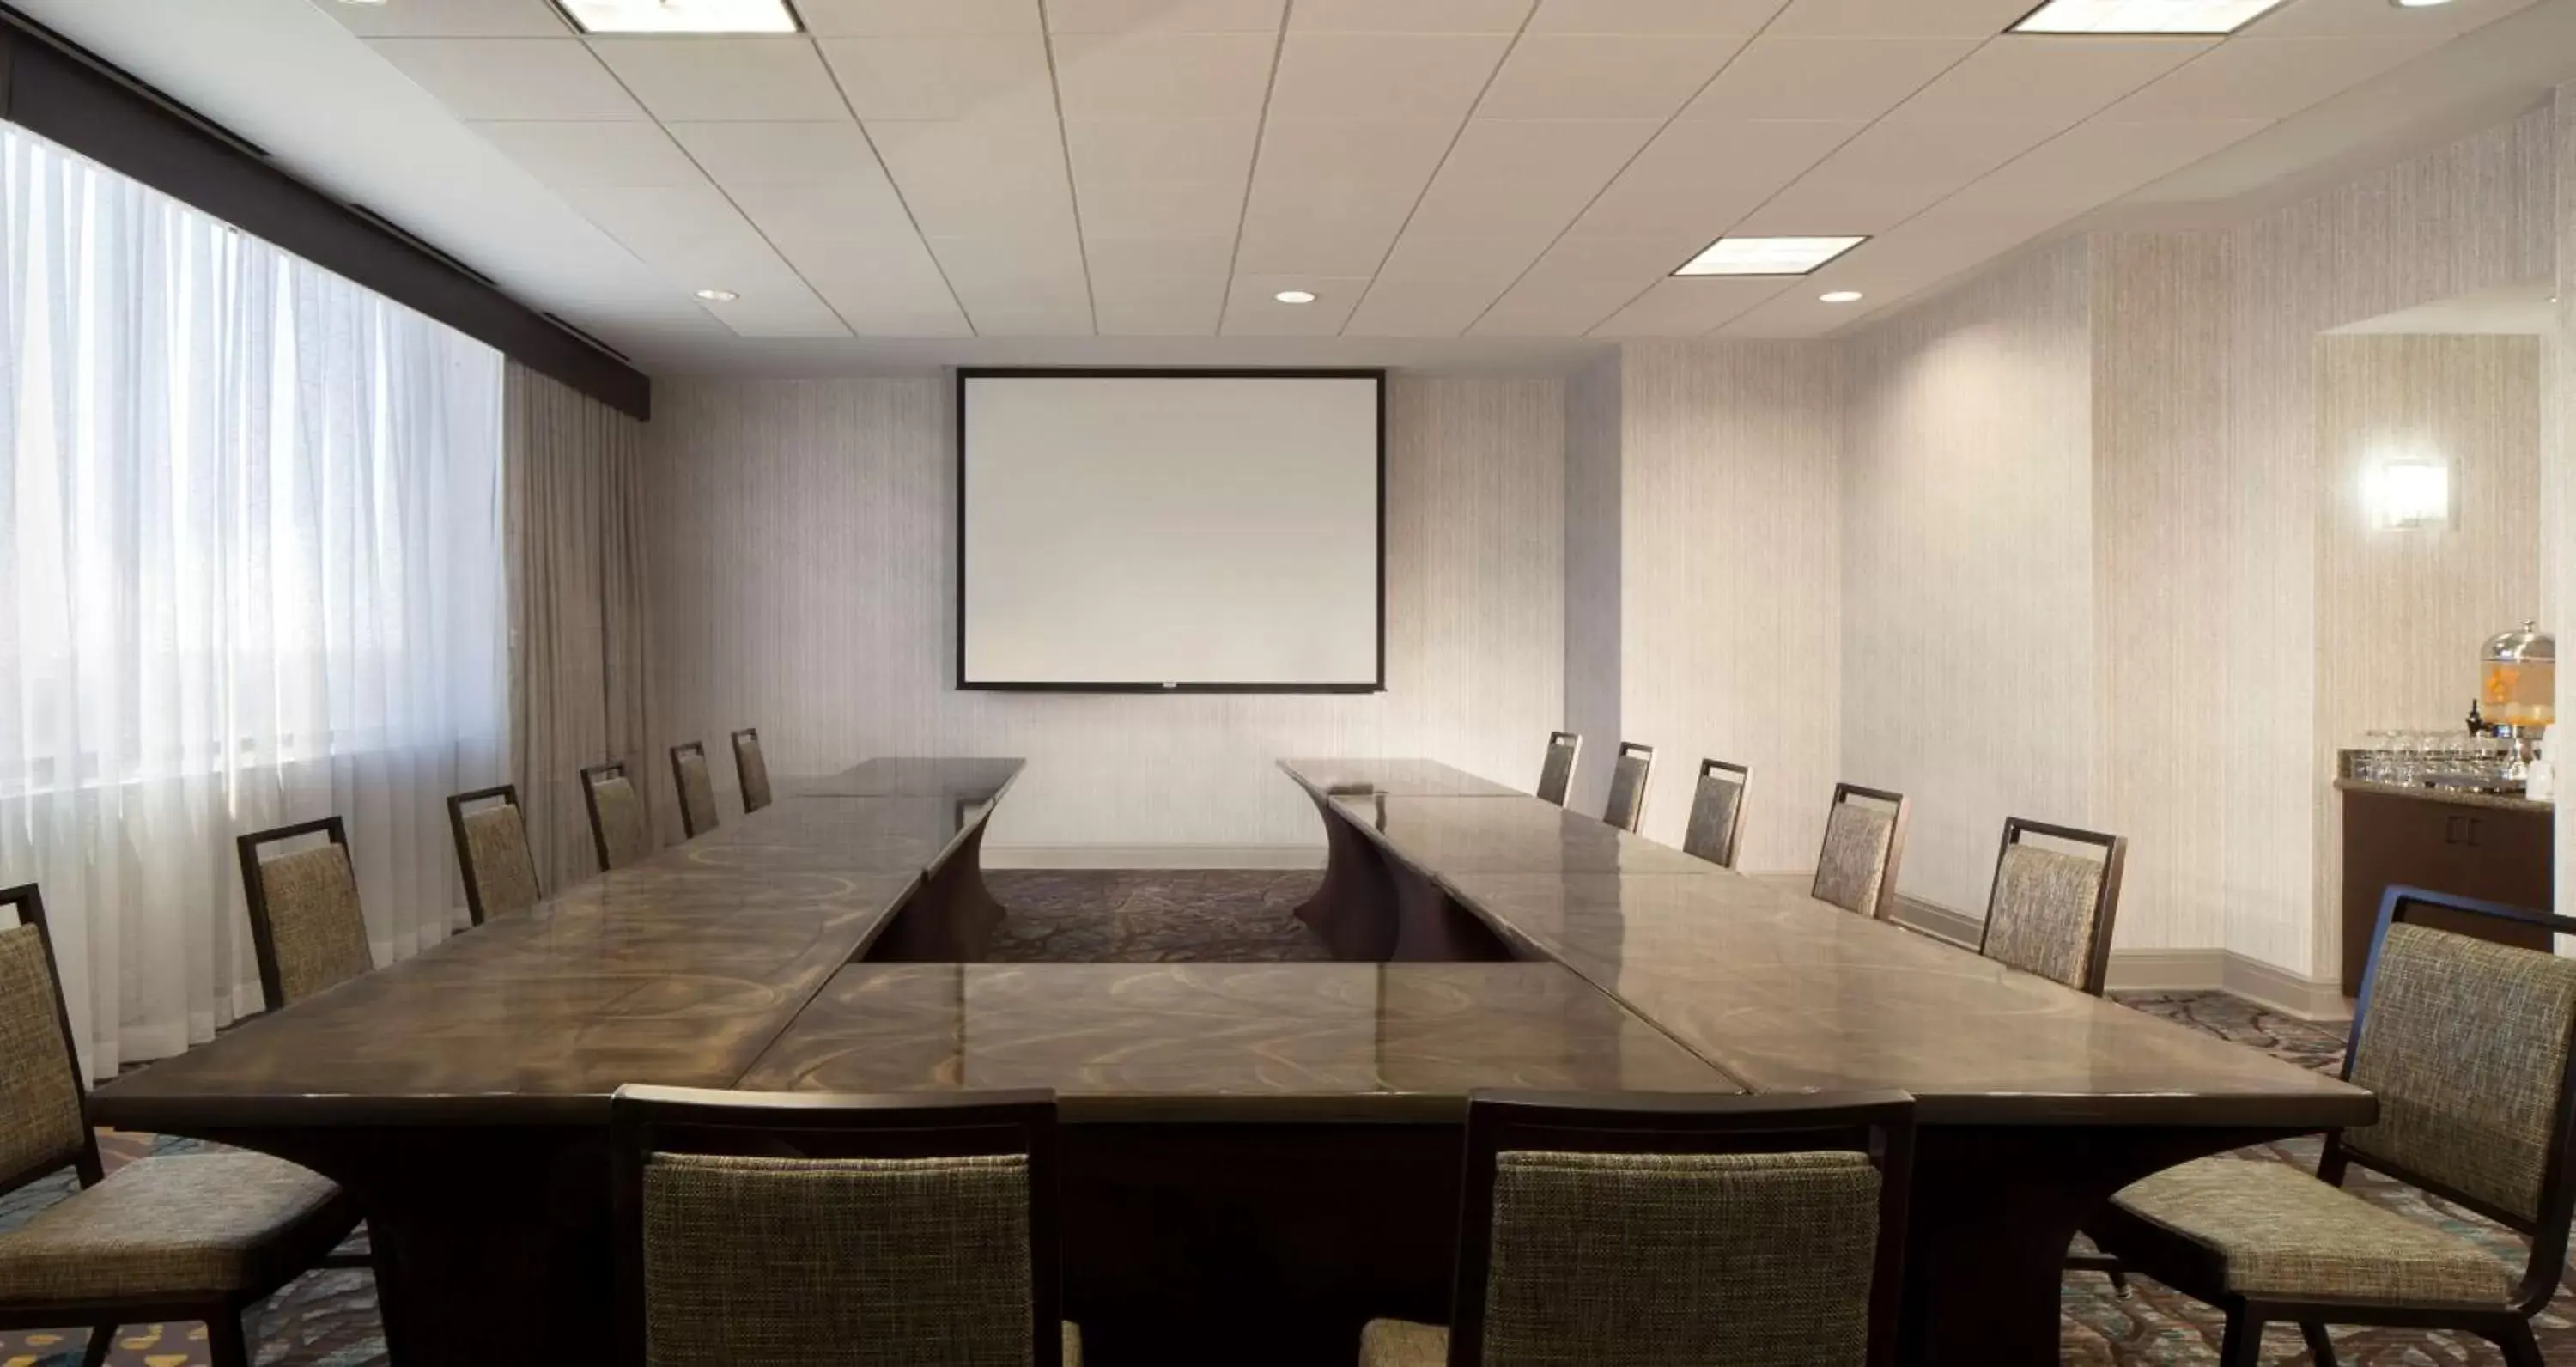 Meeting/conference room in Hilton Garden Inn Austin Downtown-Convention Center